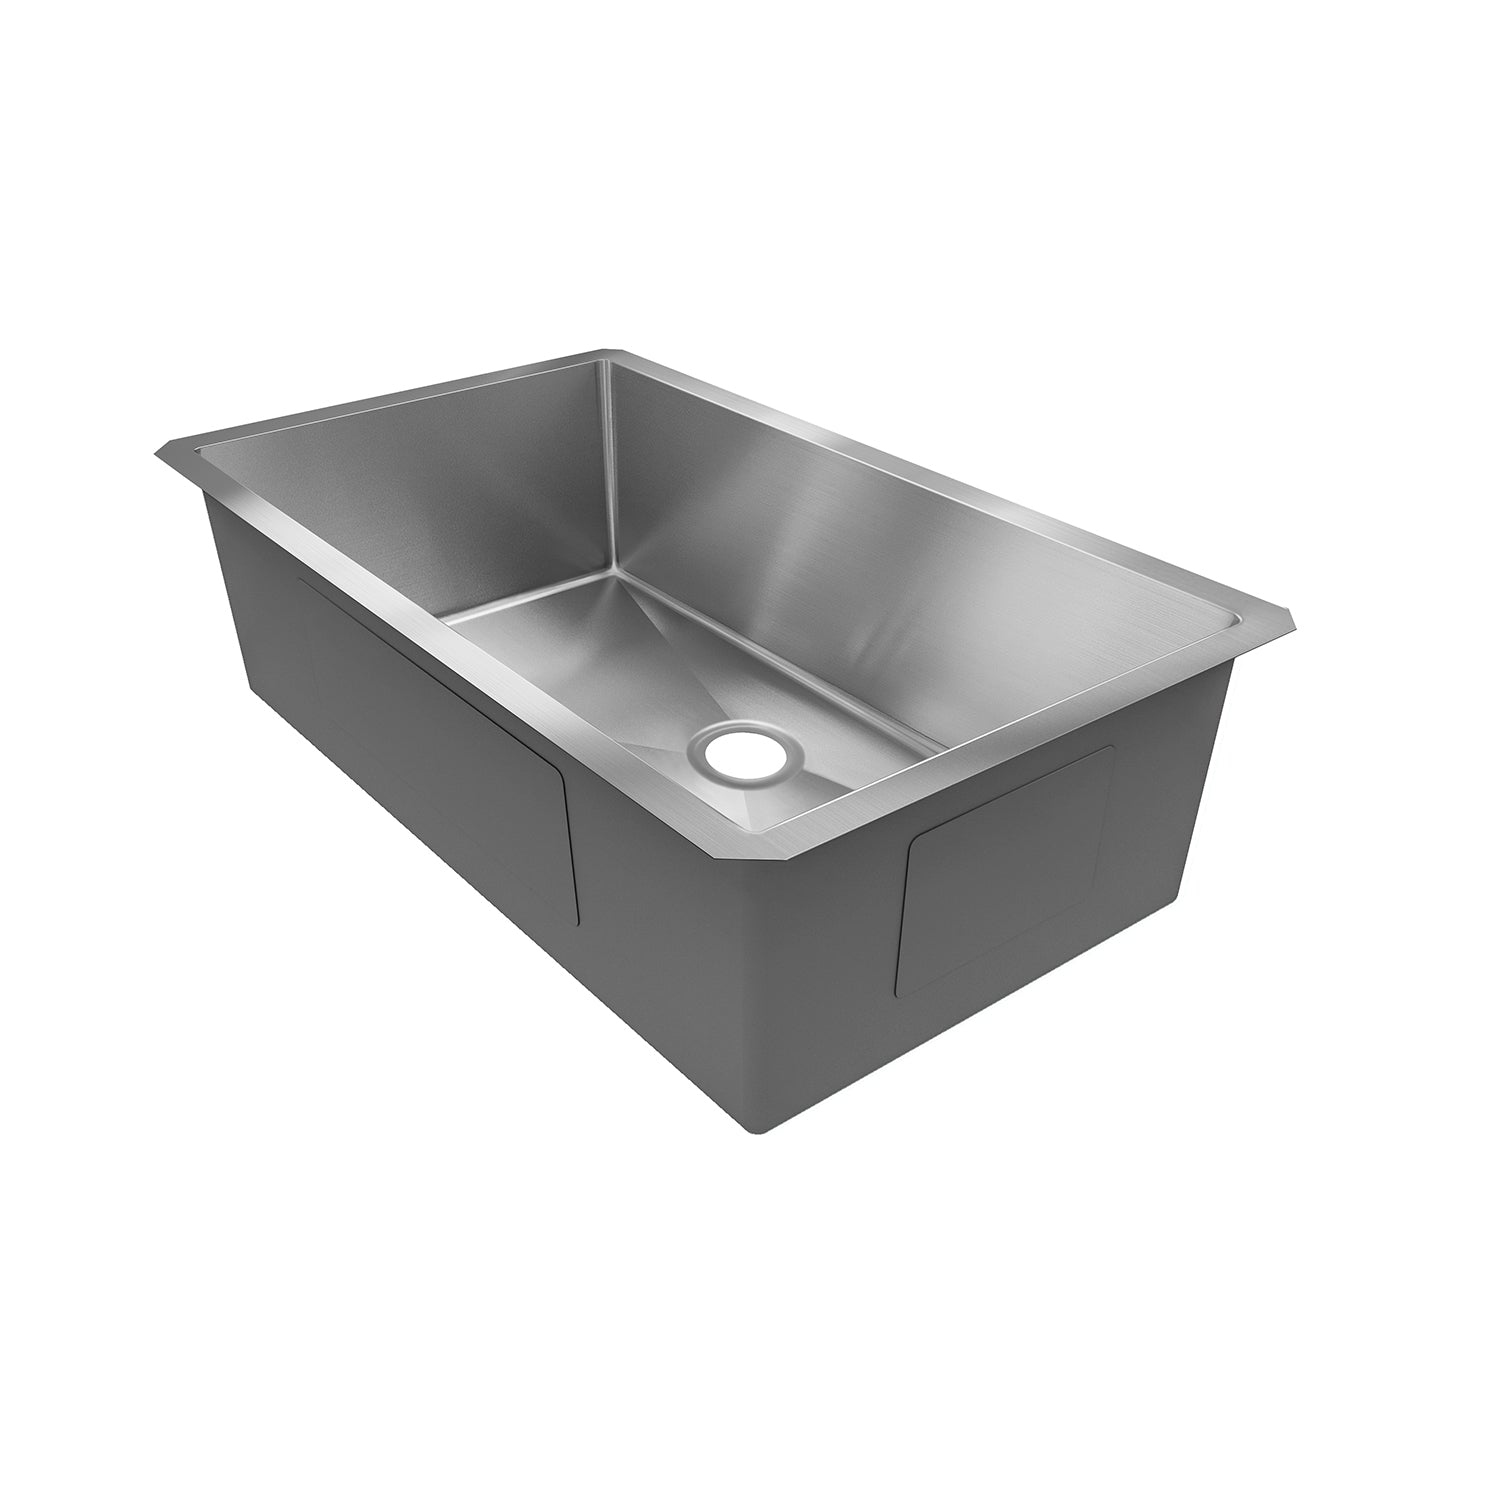 Sinber 32" x 19" x 10" Undermount Single Bowl Kitchen Sink with 16 Gauge 304 Stainless Steel Satin Finish HU3219S-S-16 (Sink Only)